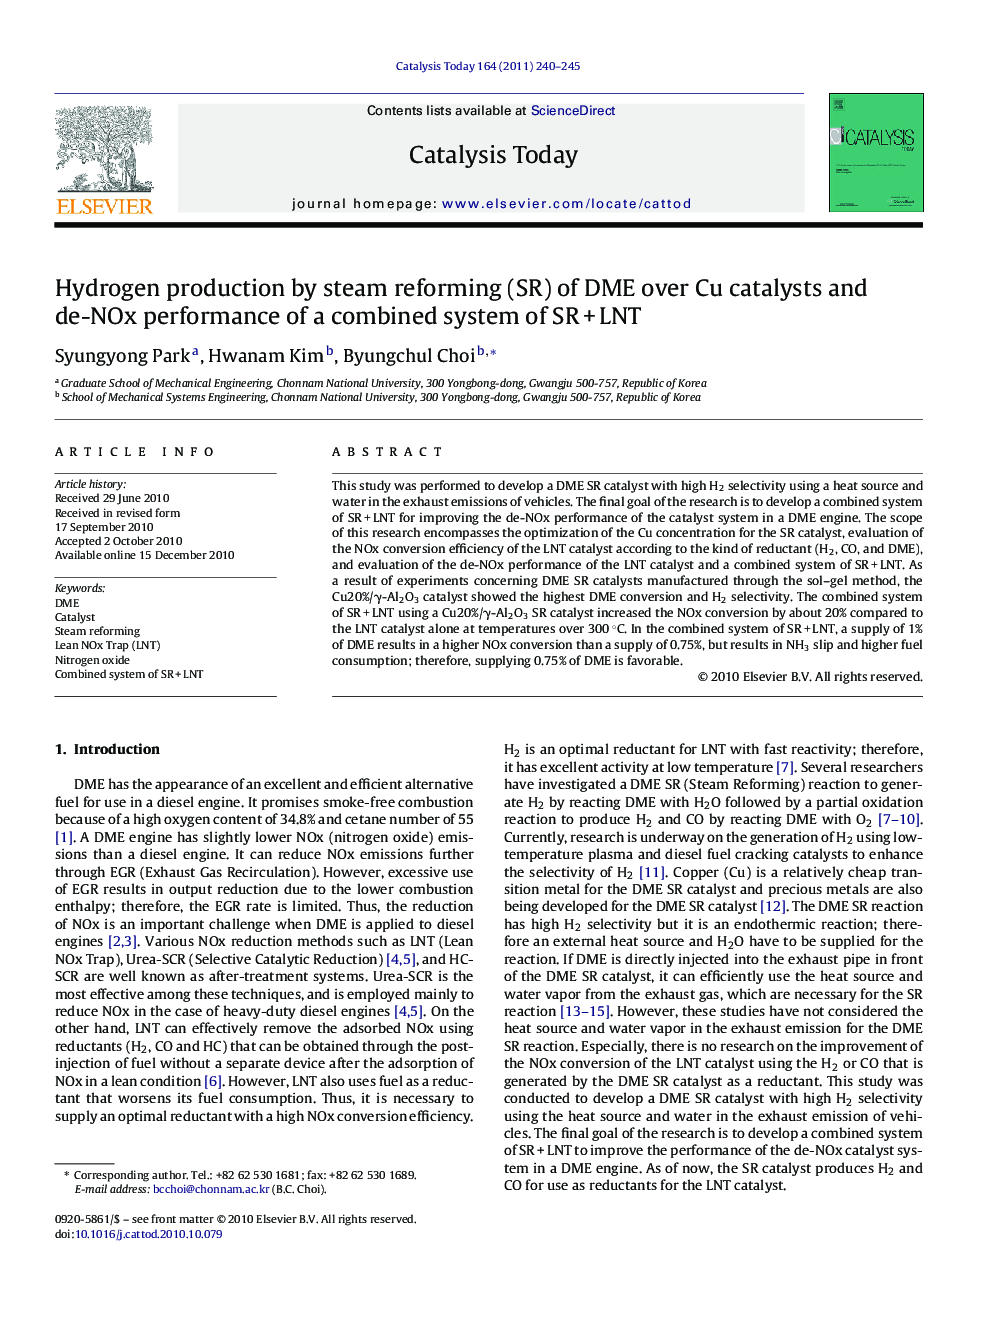 Hydrogen production by steam reforming (SR) of DME over Cu catalysts and de-NOx performance of a combined system of SR + LNT